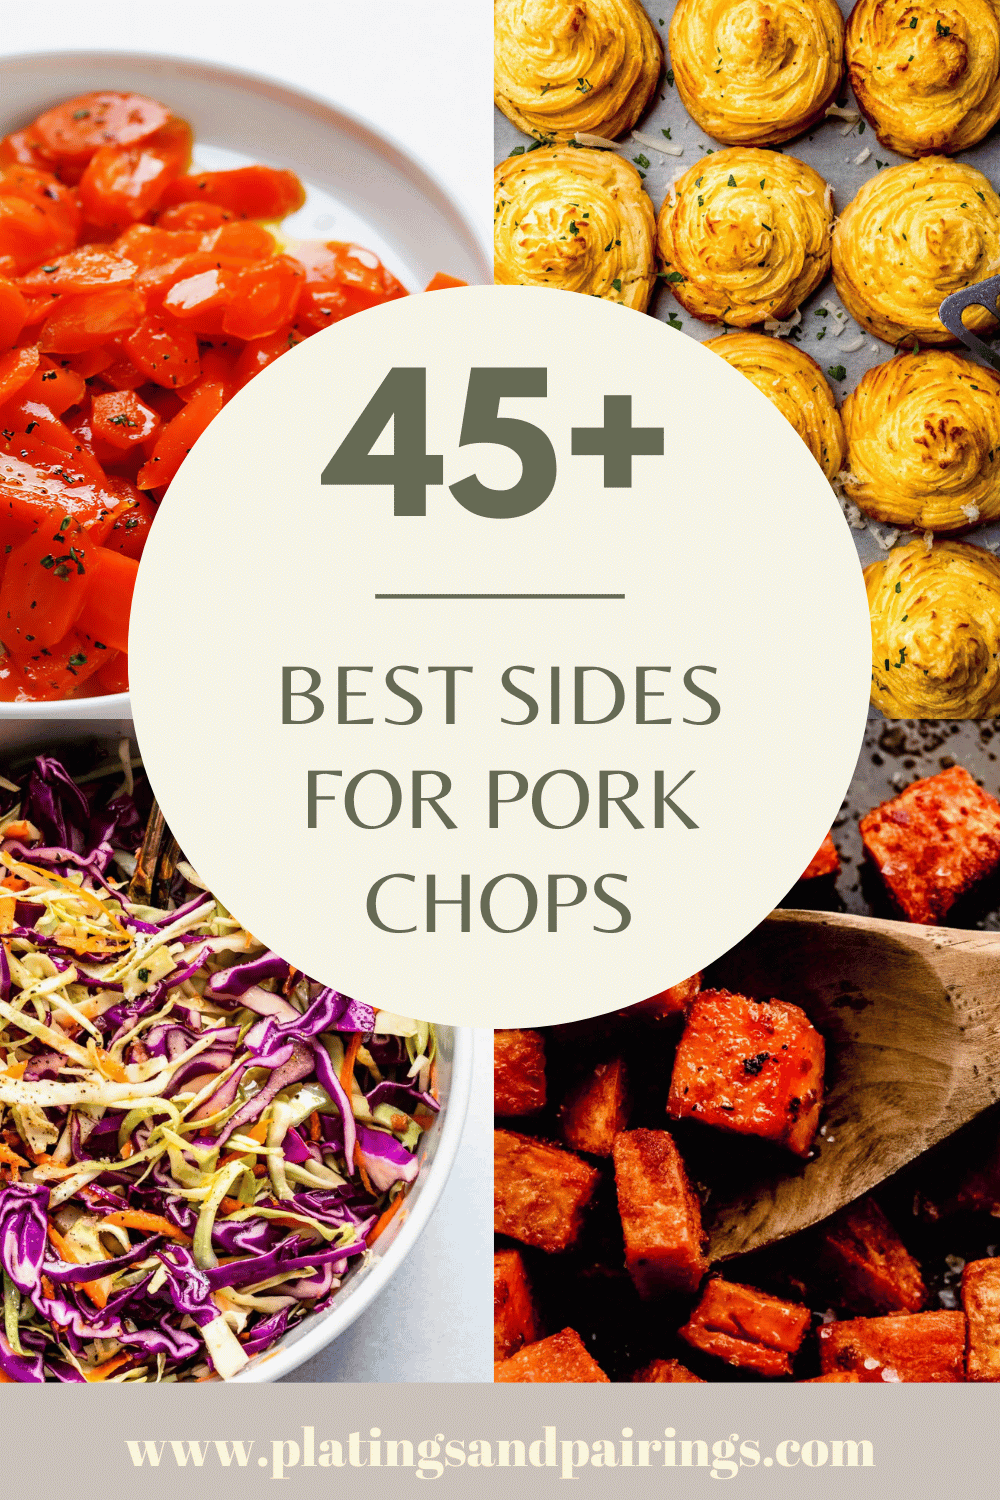 Collage of side dishes for pork chops with text overlay.